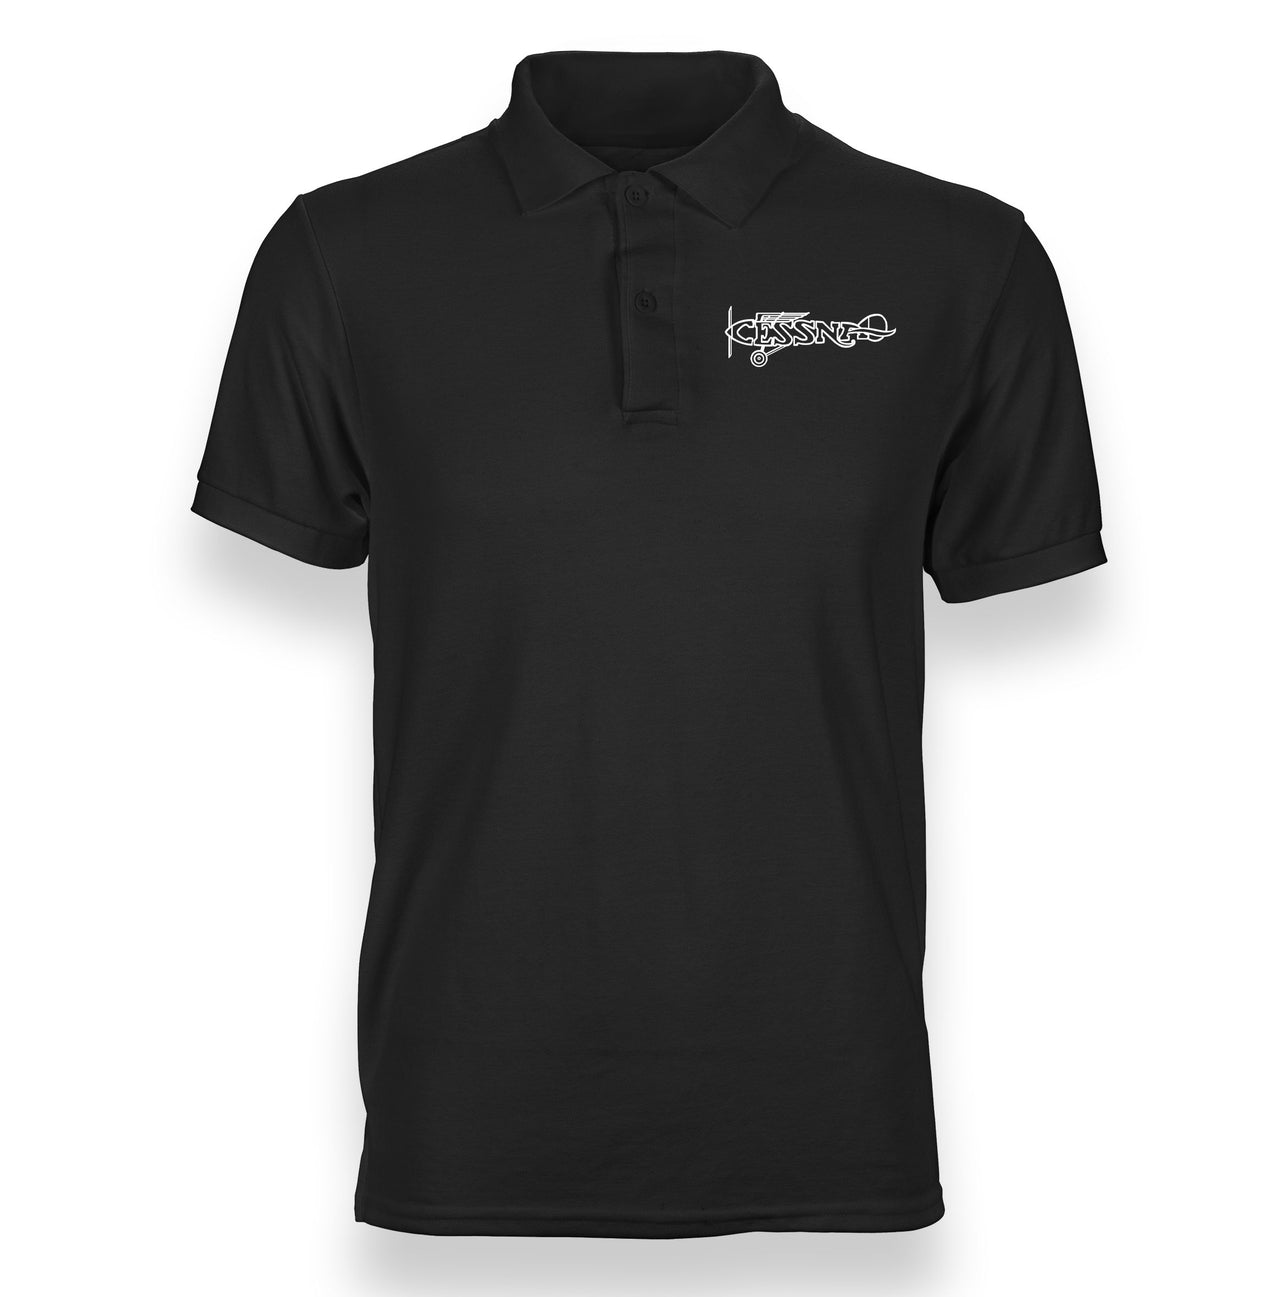 Special Cessna Text Designed Polo T-Shirts